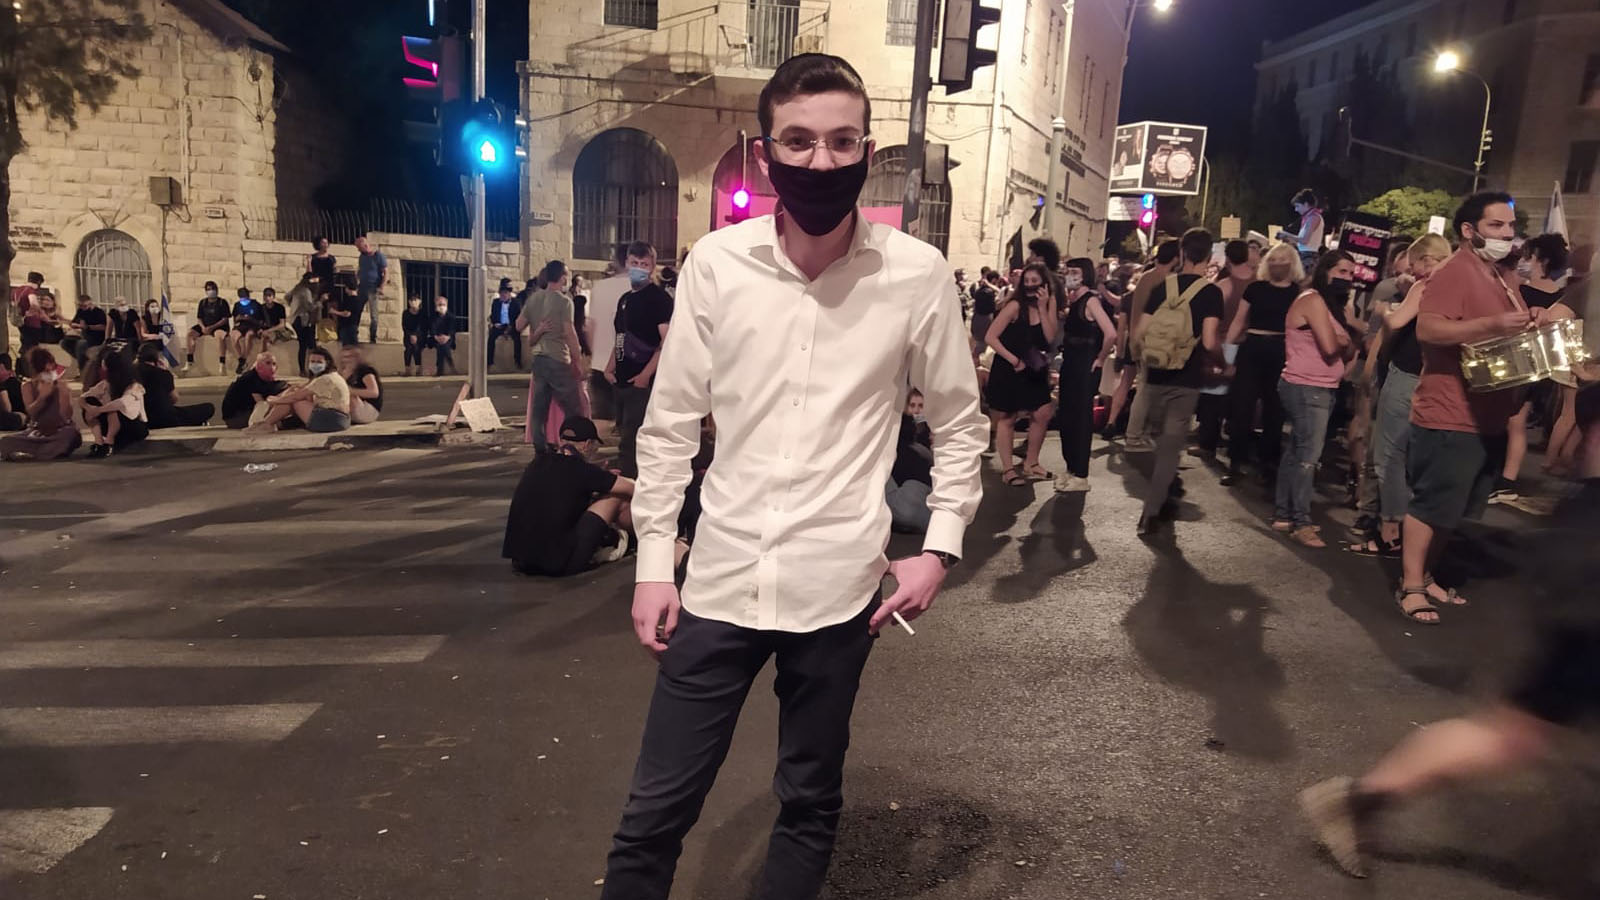 Yaakov, 22, from Jerusalem, came to show support. (Photo: Yahel Faraj)